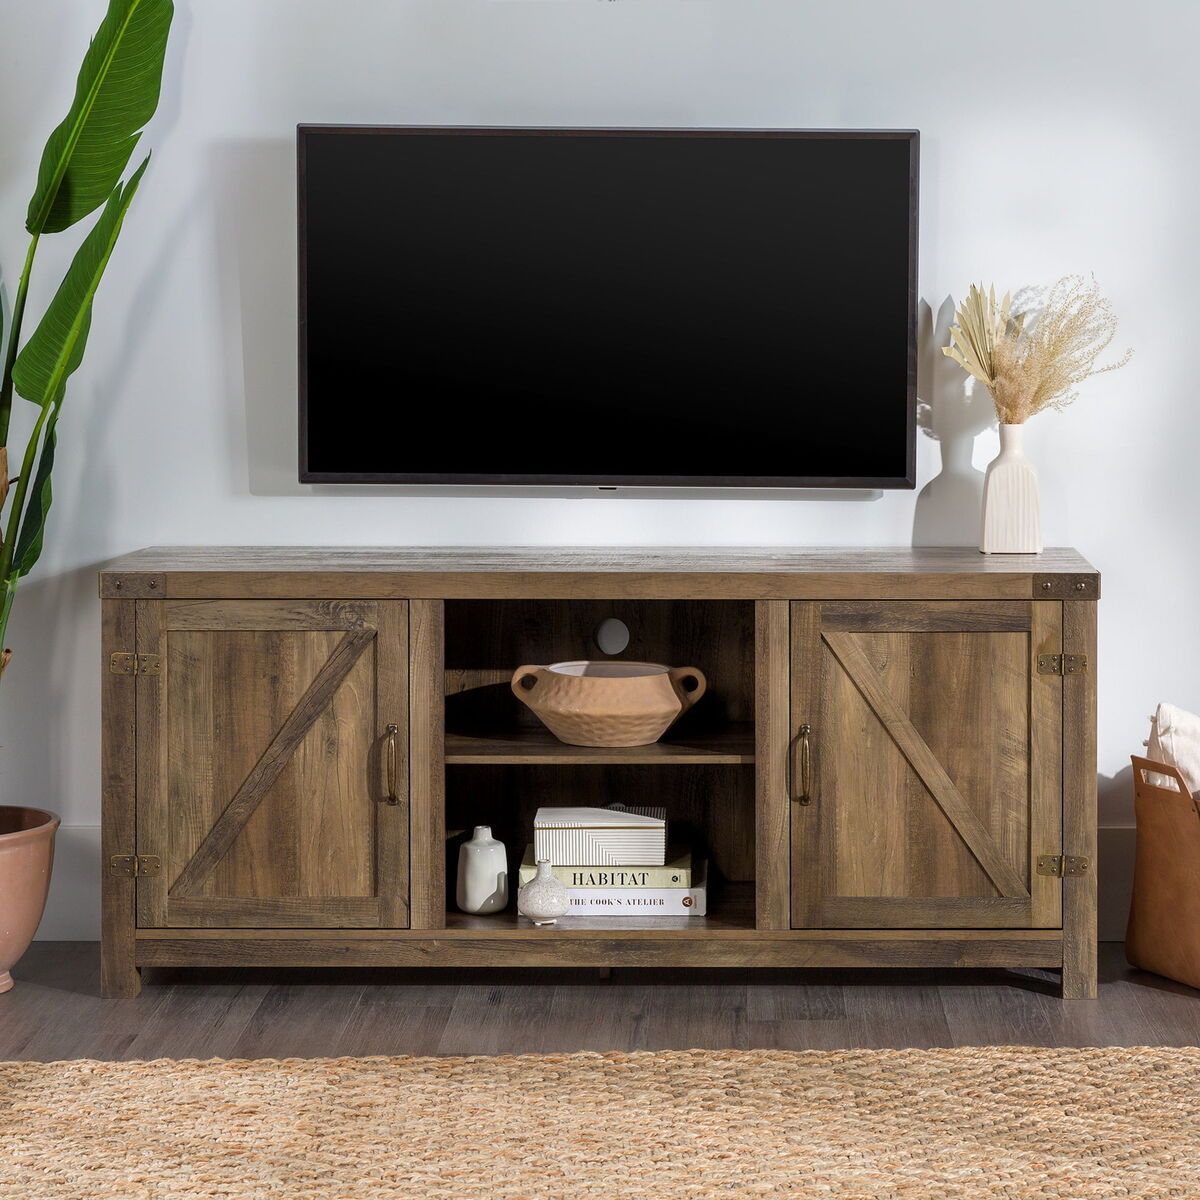 Woven Paths Modern Farmhouse Barn Door Tv Stand For Tvs Up To 65",  Reclaimed | Ebay Throughout Modern Farmhouse Barn Tv Stands (View 6 of 15)